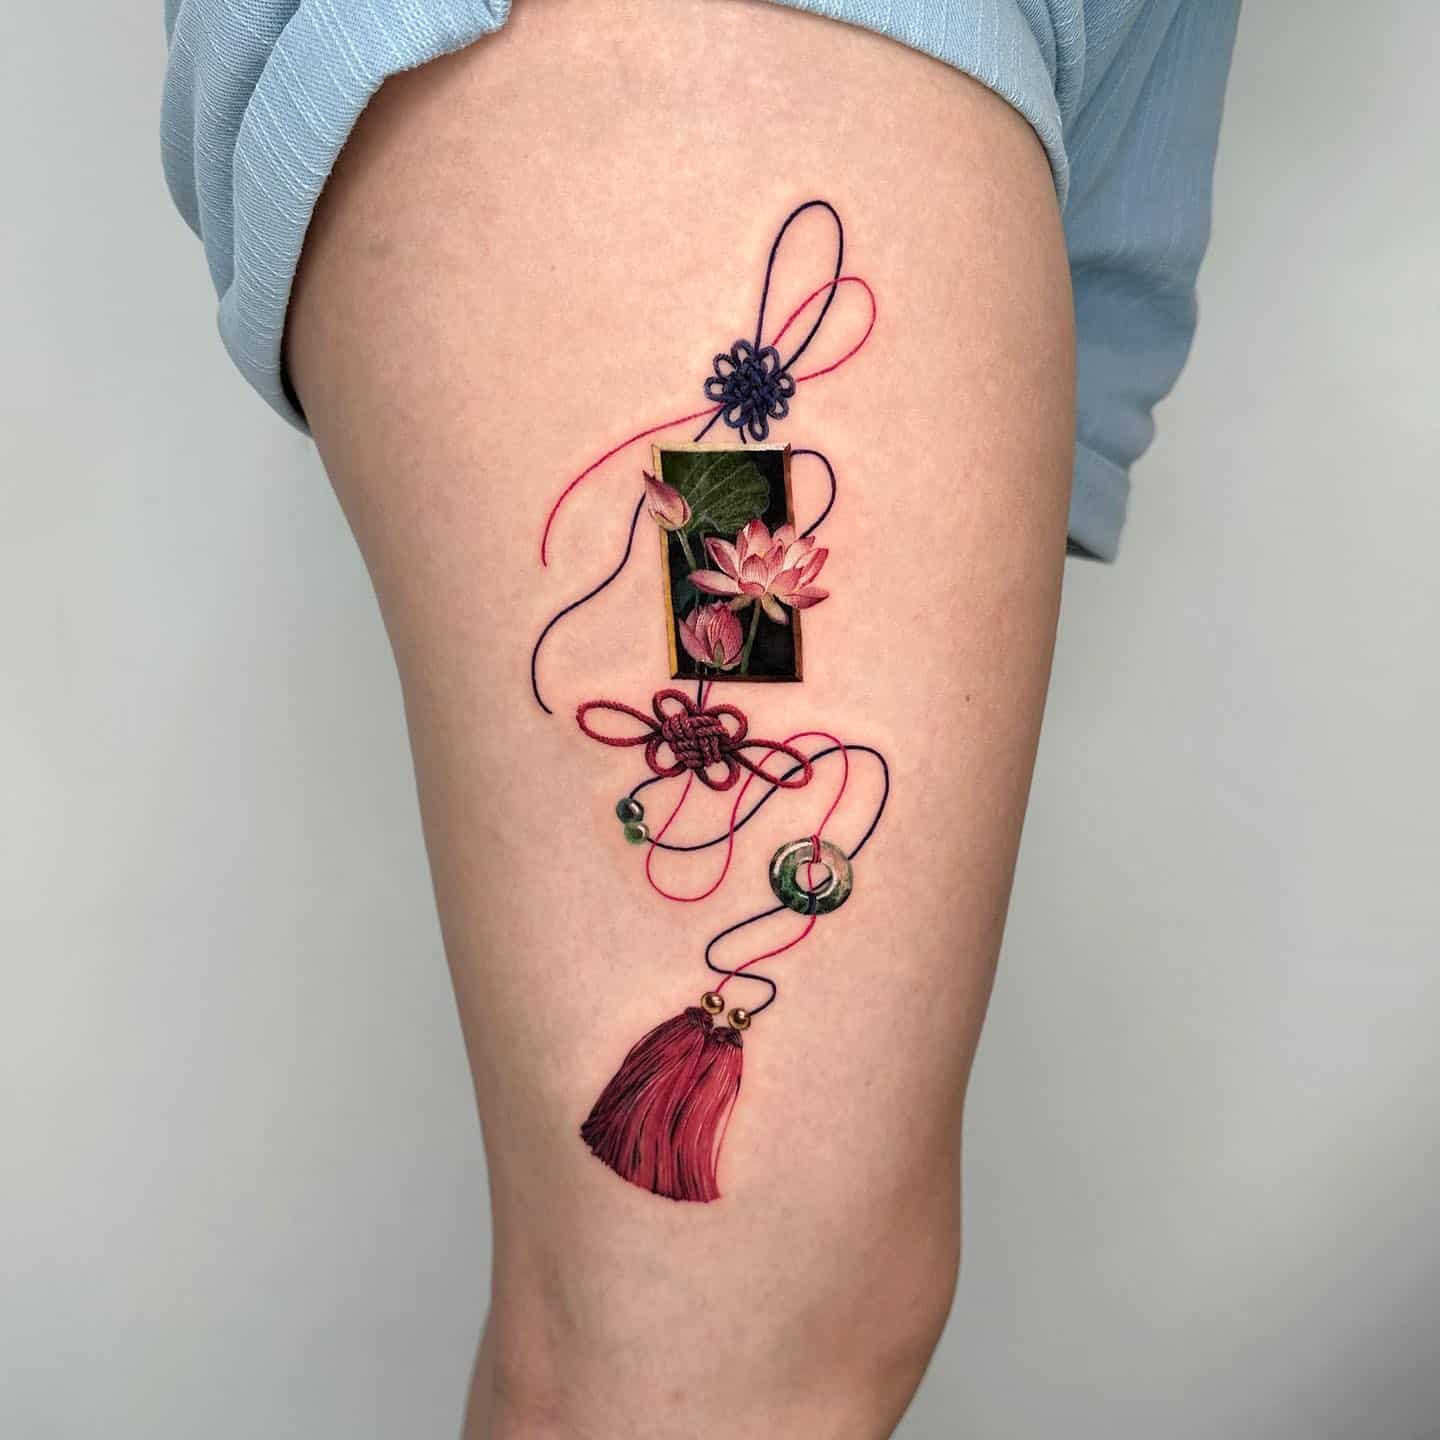 Watercolor lotus tattoo by tattooist coldy